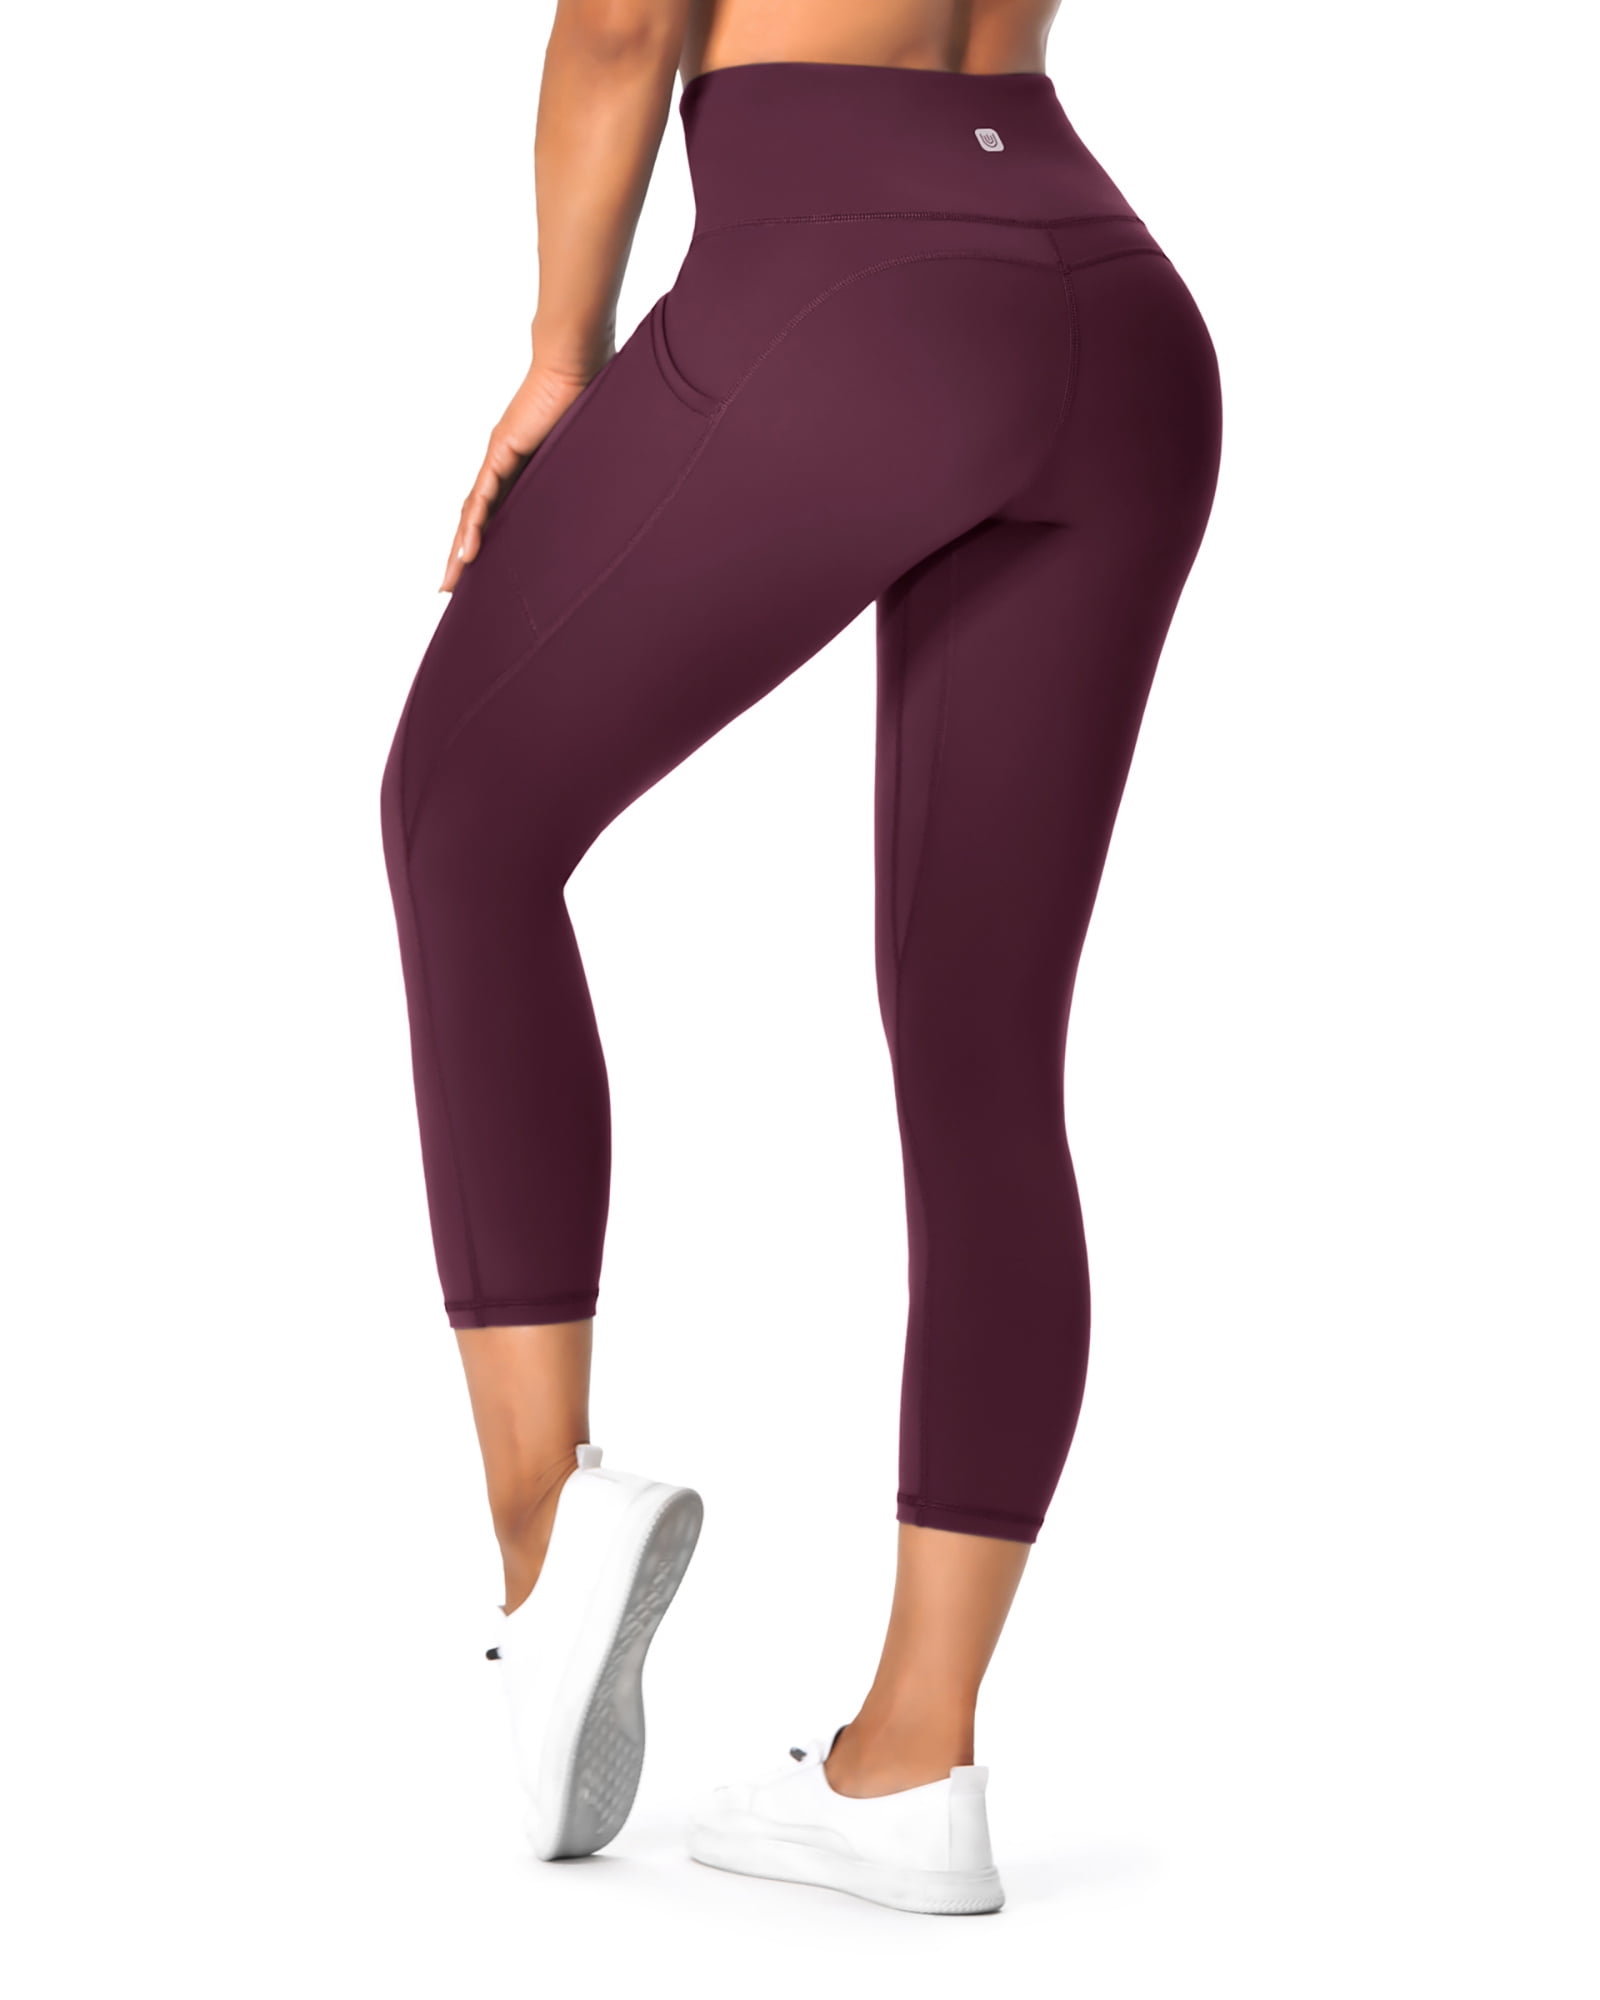 UUE 21Inseam Burgundy Red Workout Leggings for Women,Yoga Capris with  Pockets Tummy Control, Butt Lifting Leggings for Running, Hiking, Cycling 